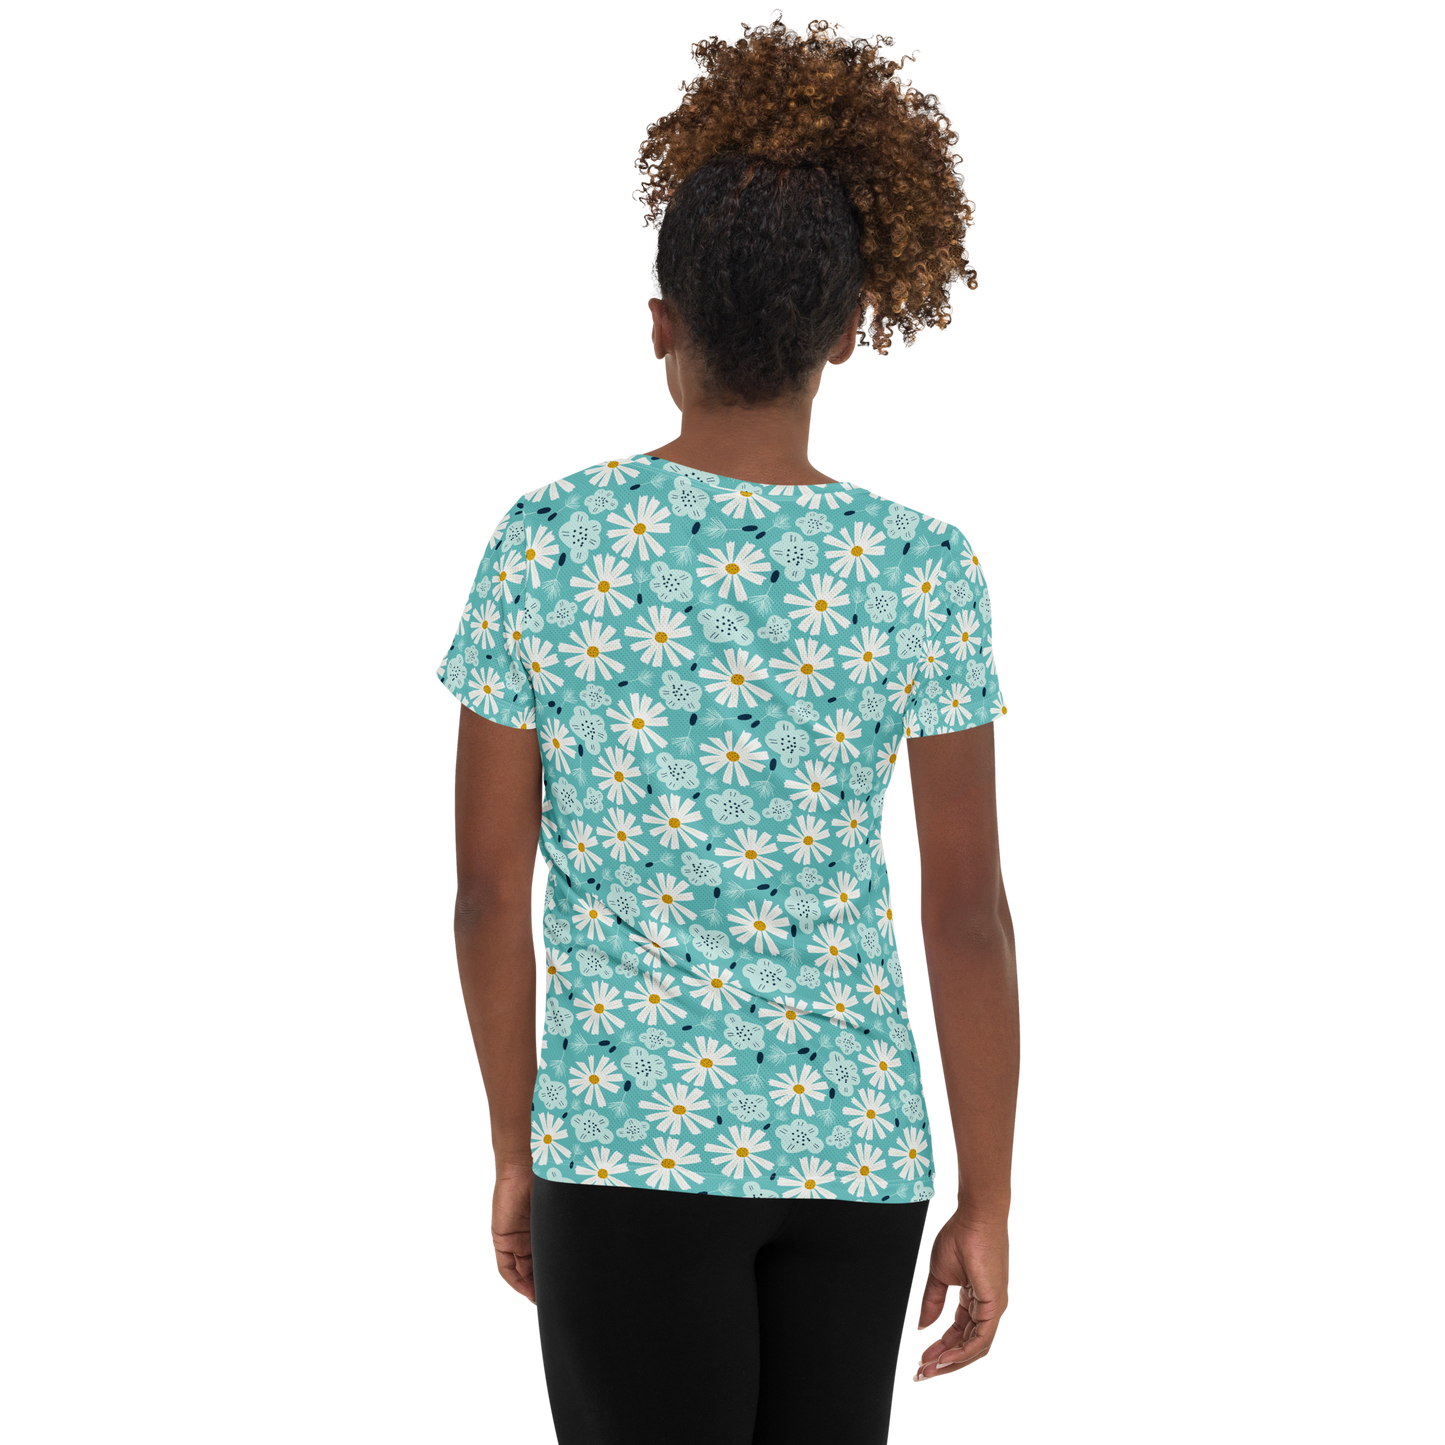 Scandinavian Spring Floral | Seamless Patterns | All-Over Print Women's Athletic T-Shirt - #10